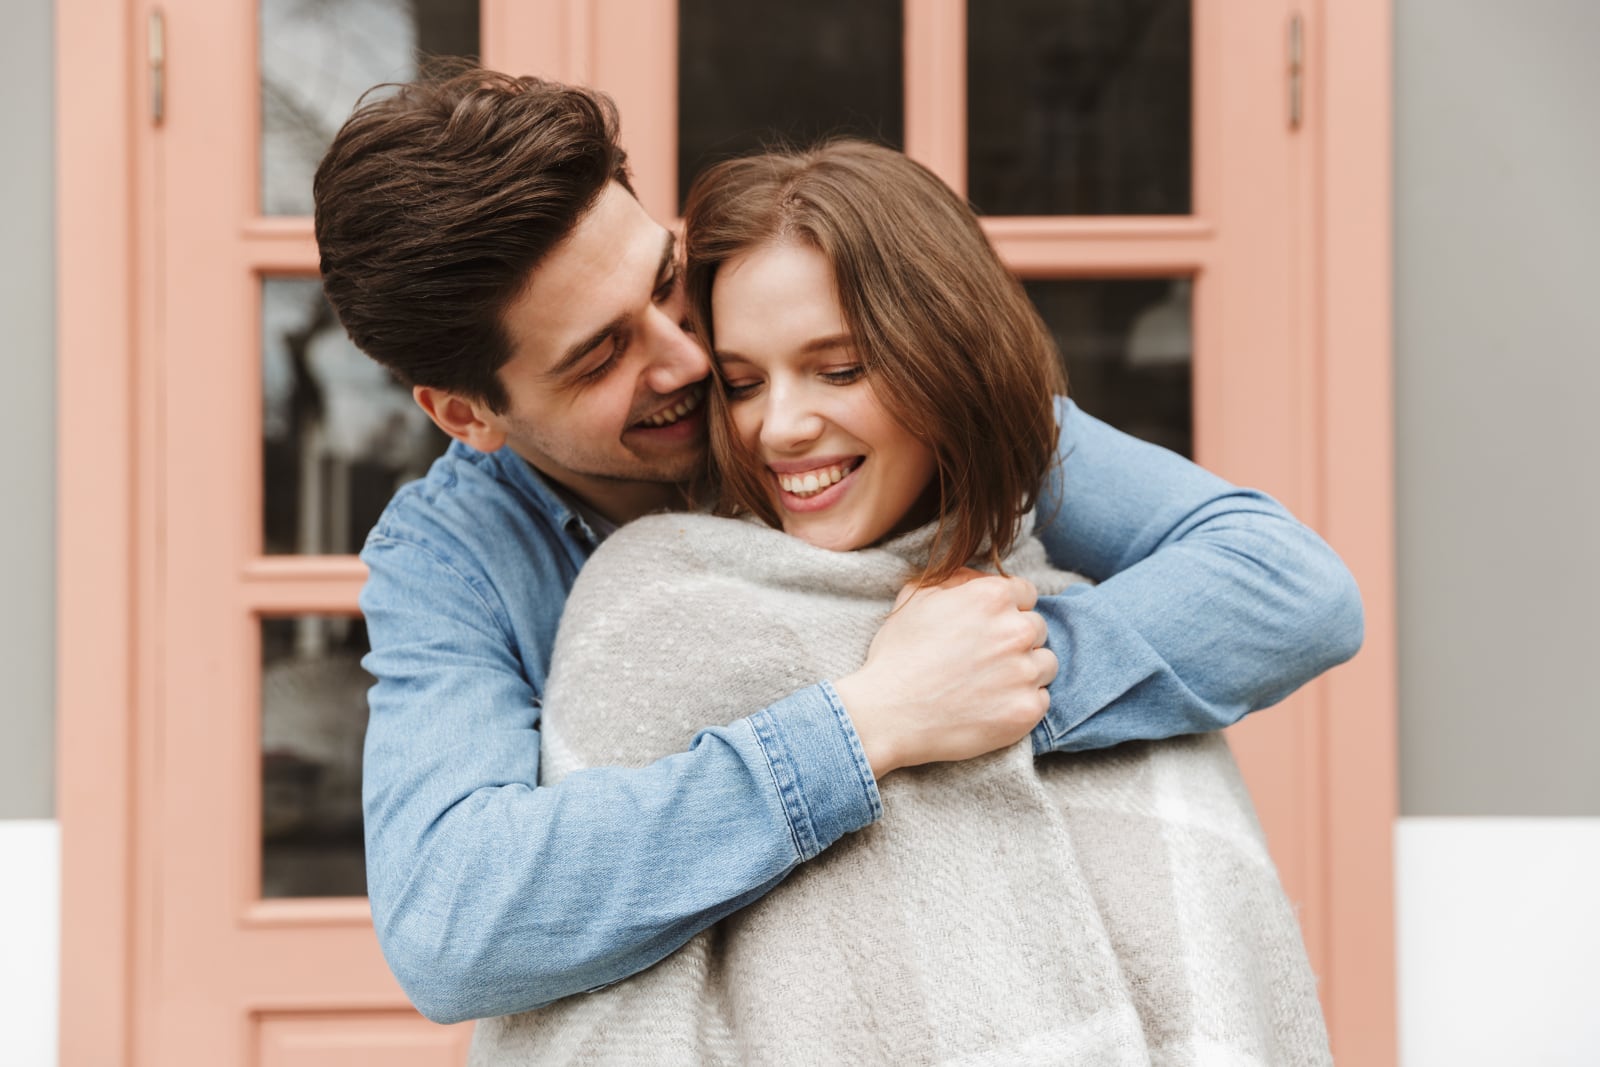 11 Signs You’re His Priority